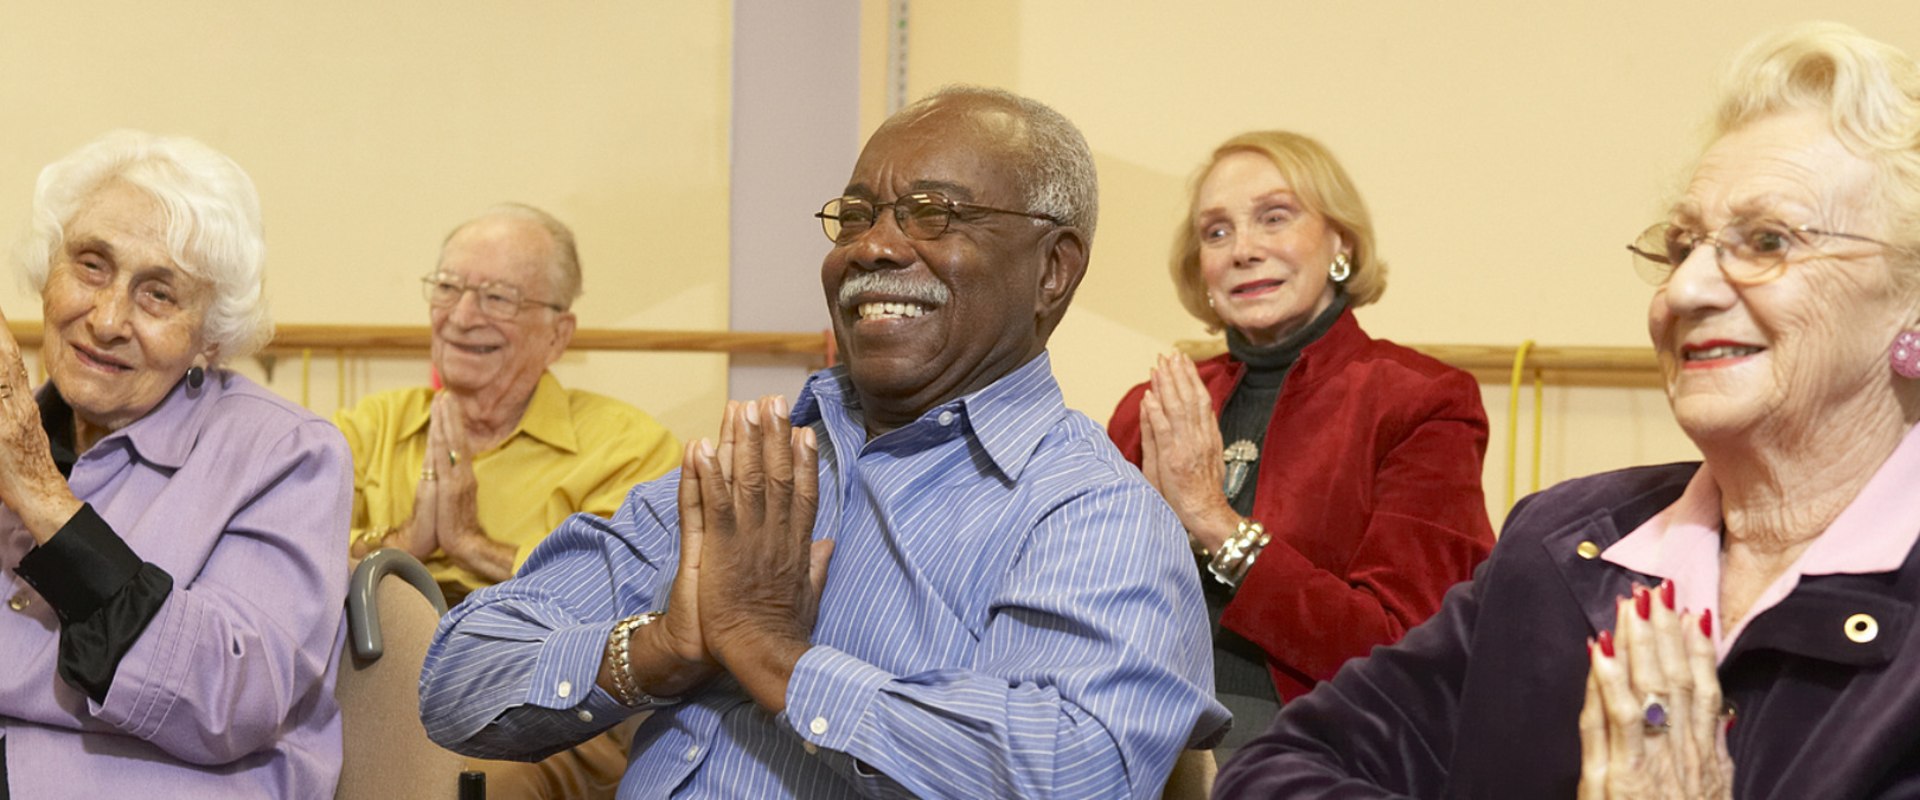 Community Services for Seniors in Middlesex County, MA